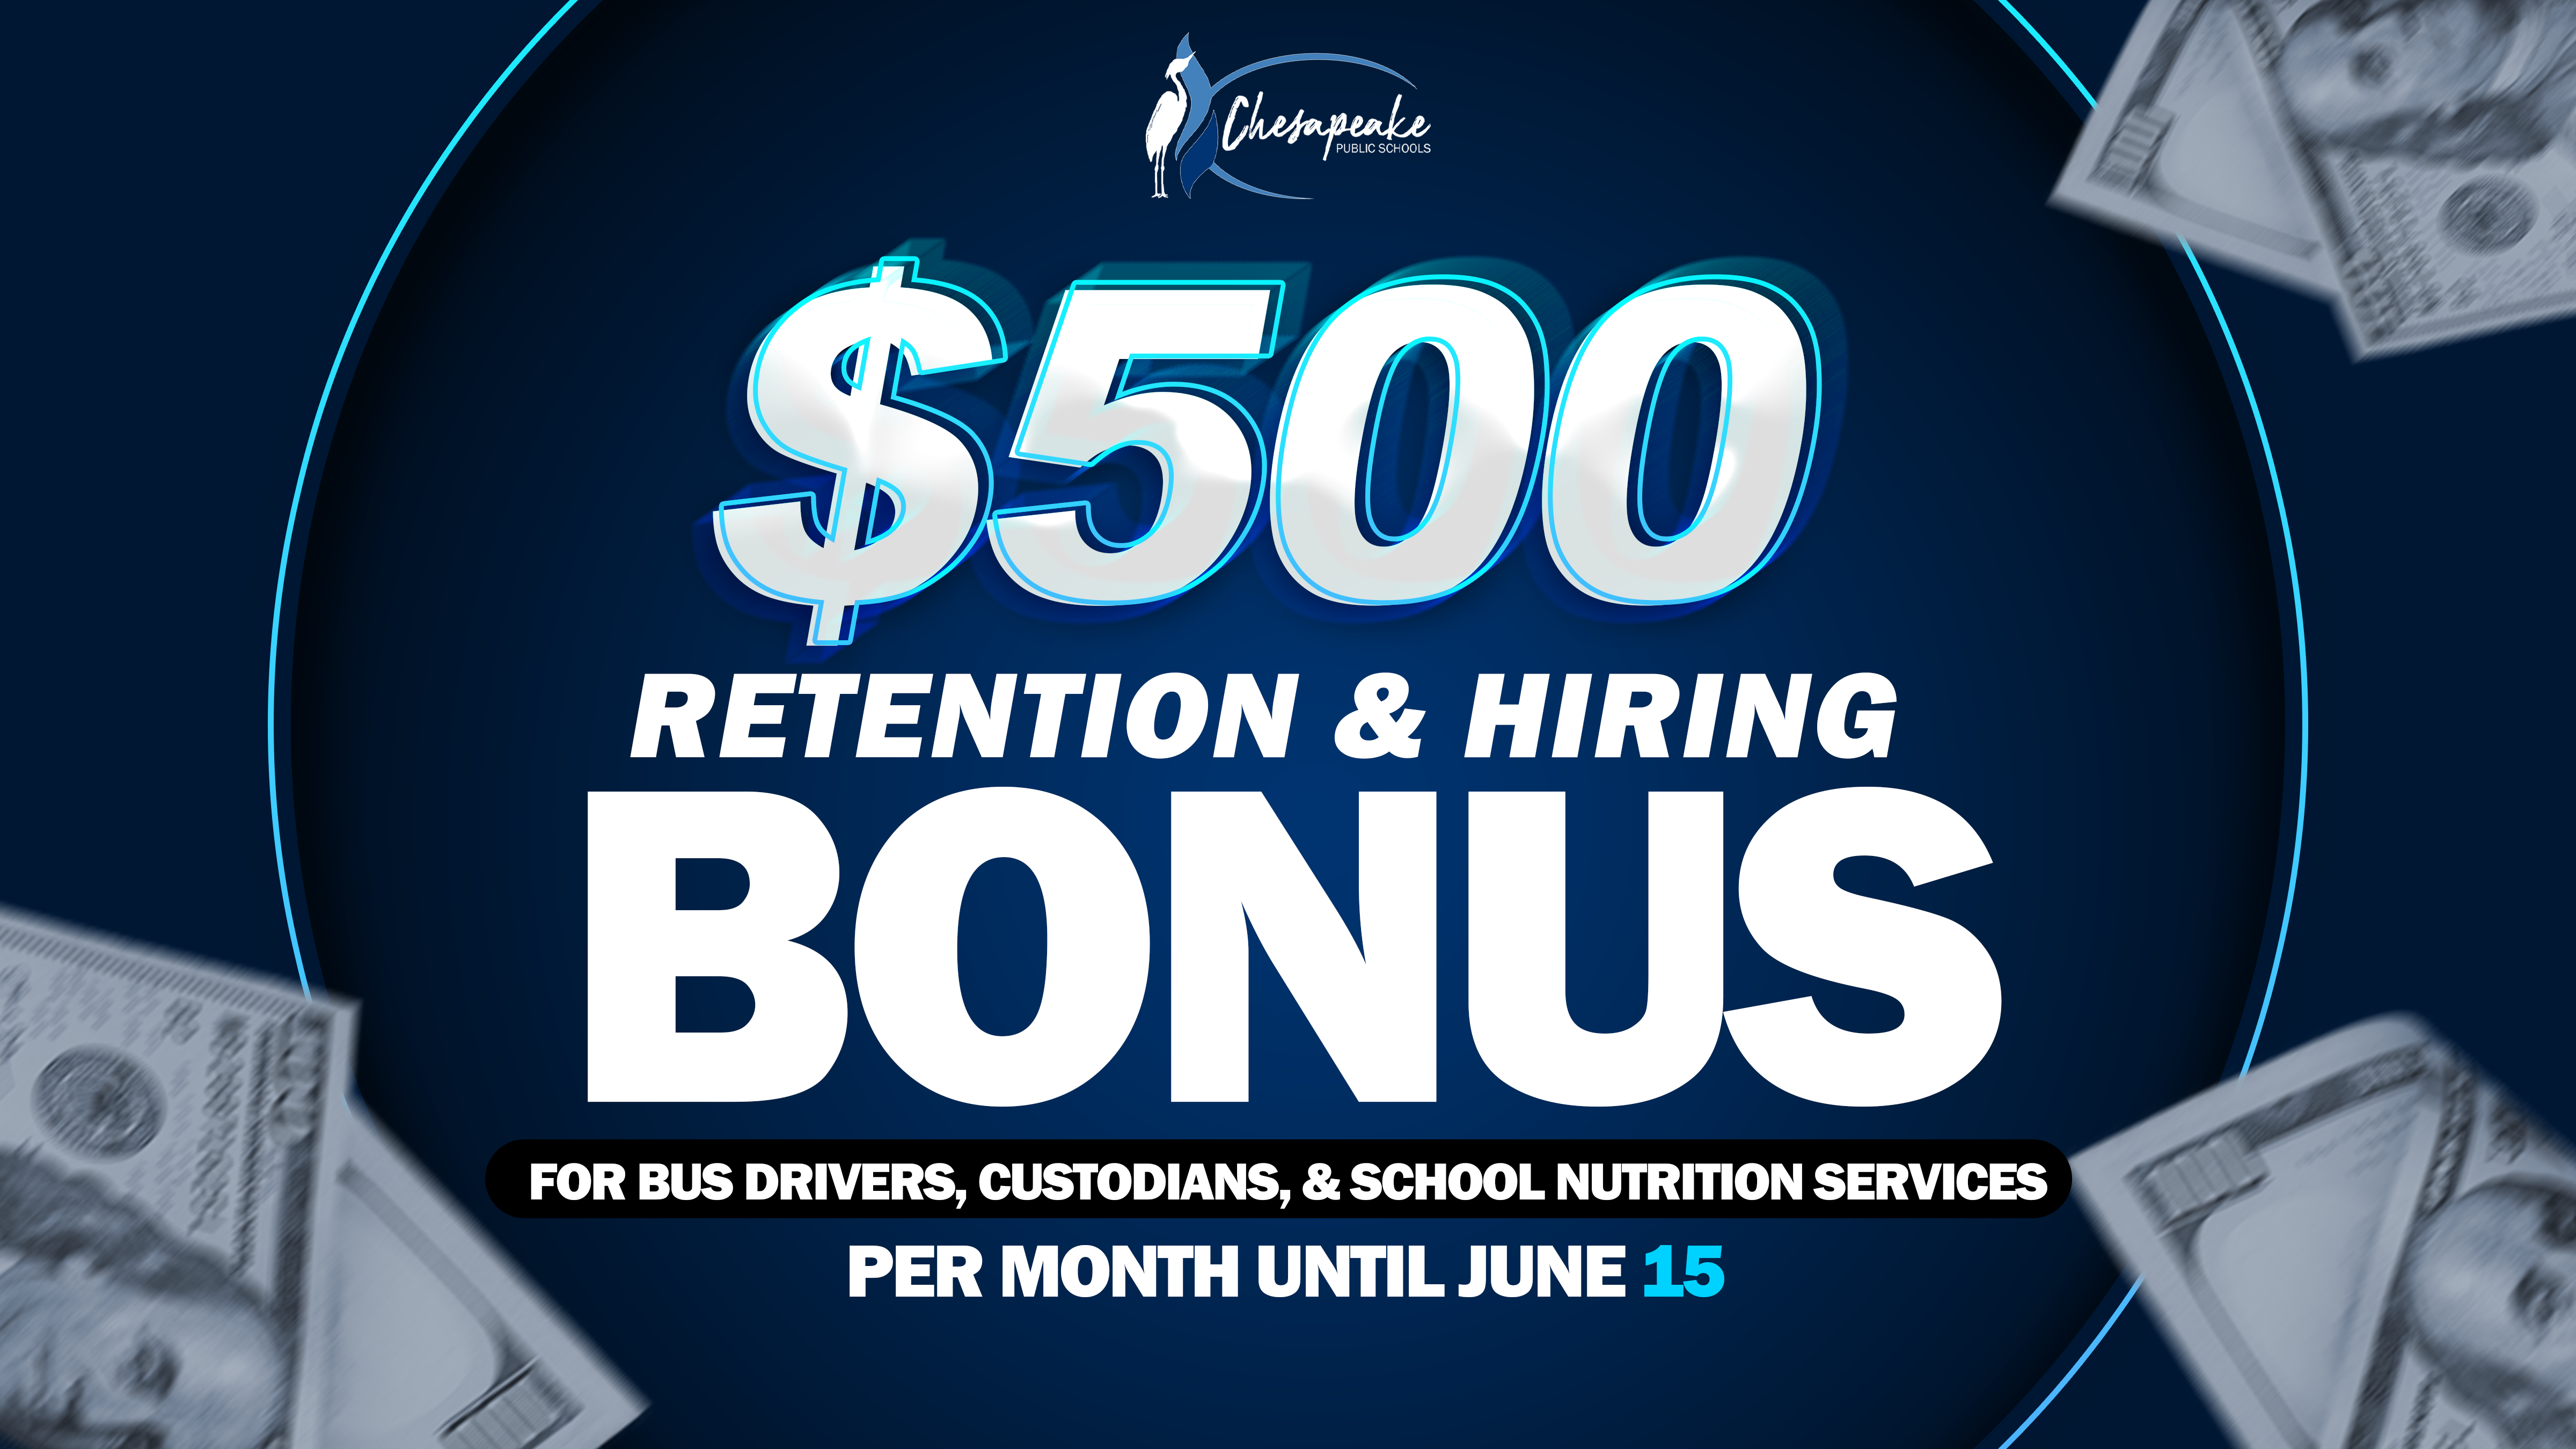 Chesapeake Public Schools is offering a $500 retention & hiring bonus for bus drivers, custodians, and school nutrition service workers now through June 15, 2024